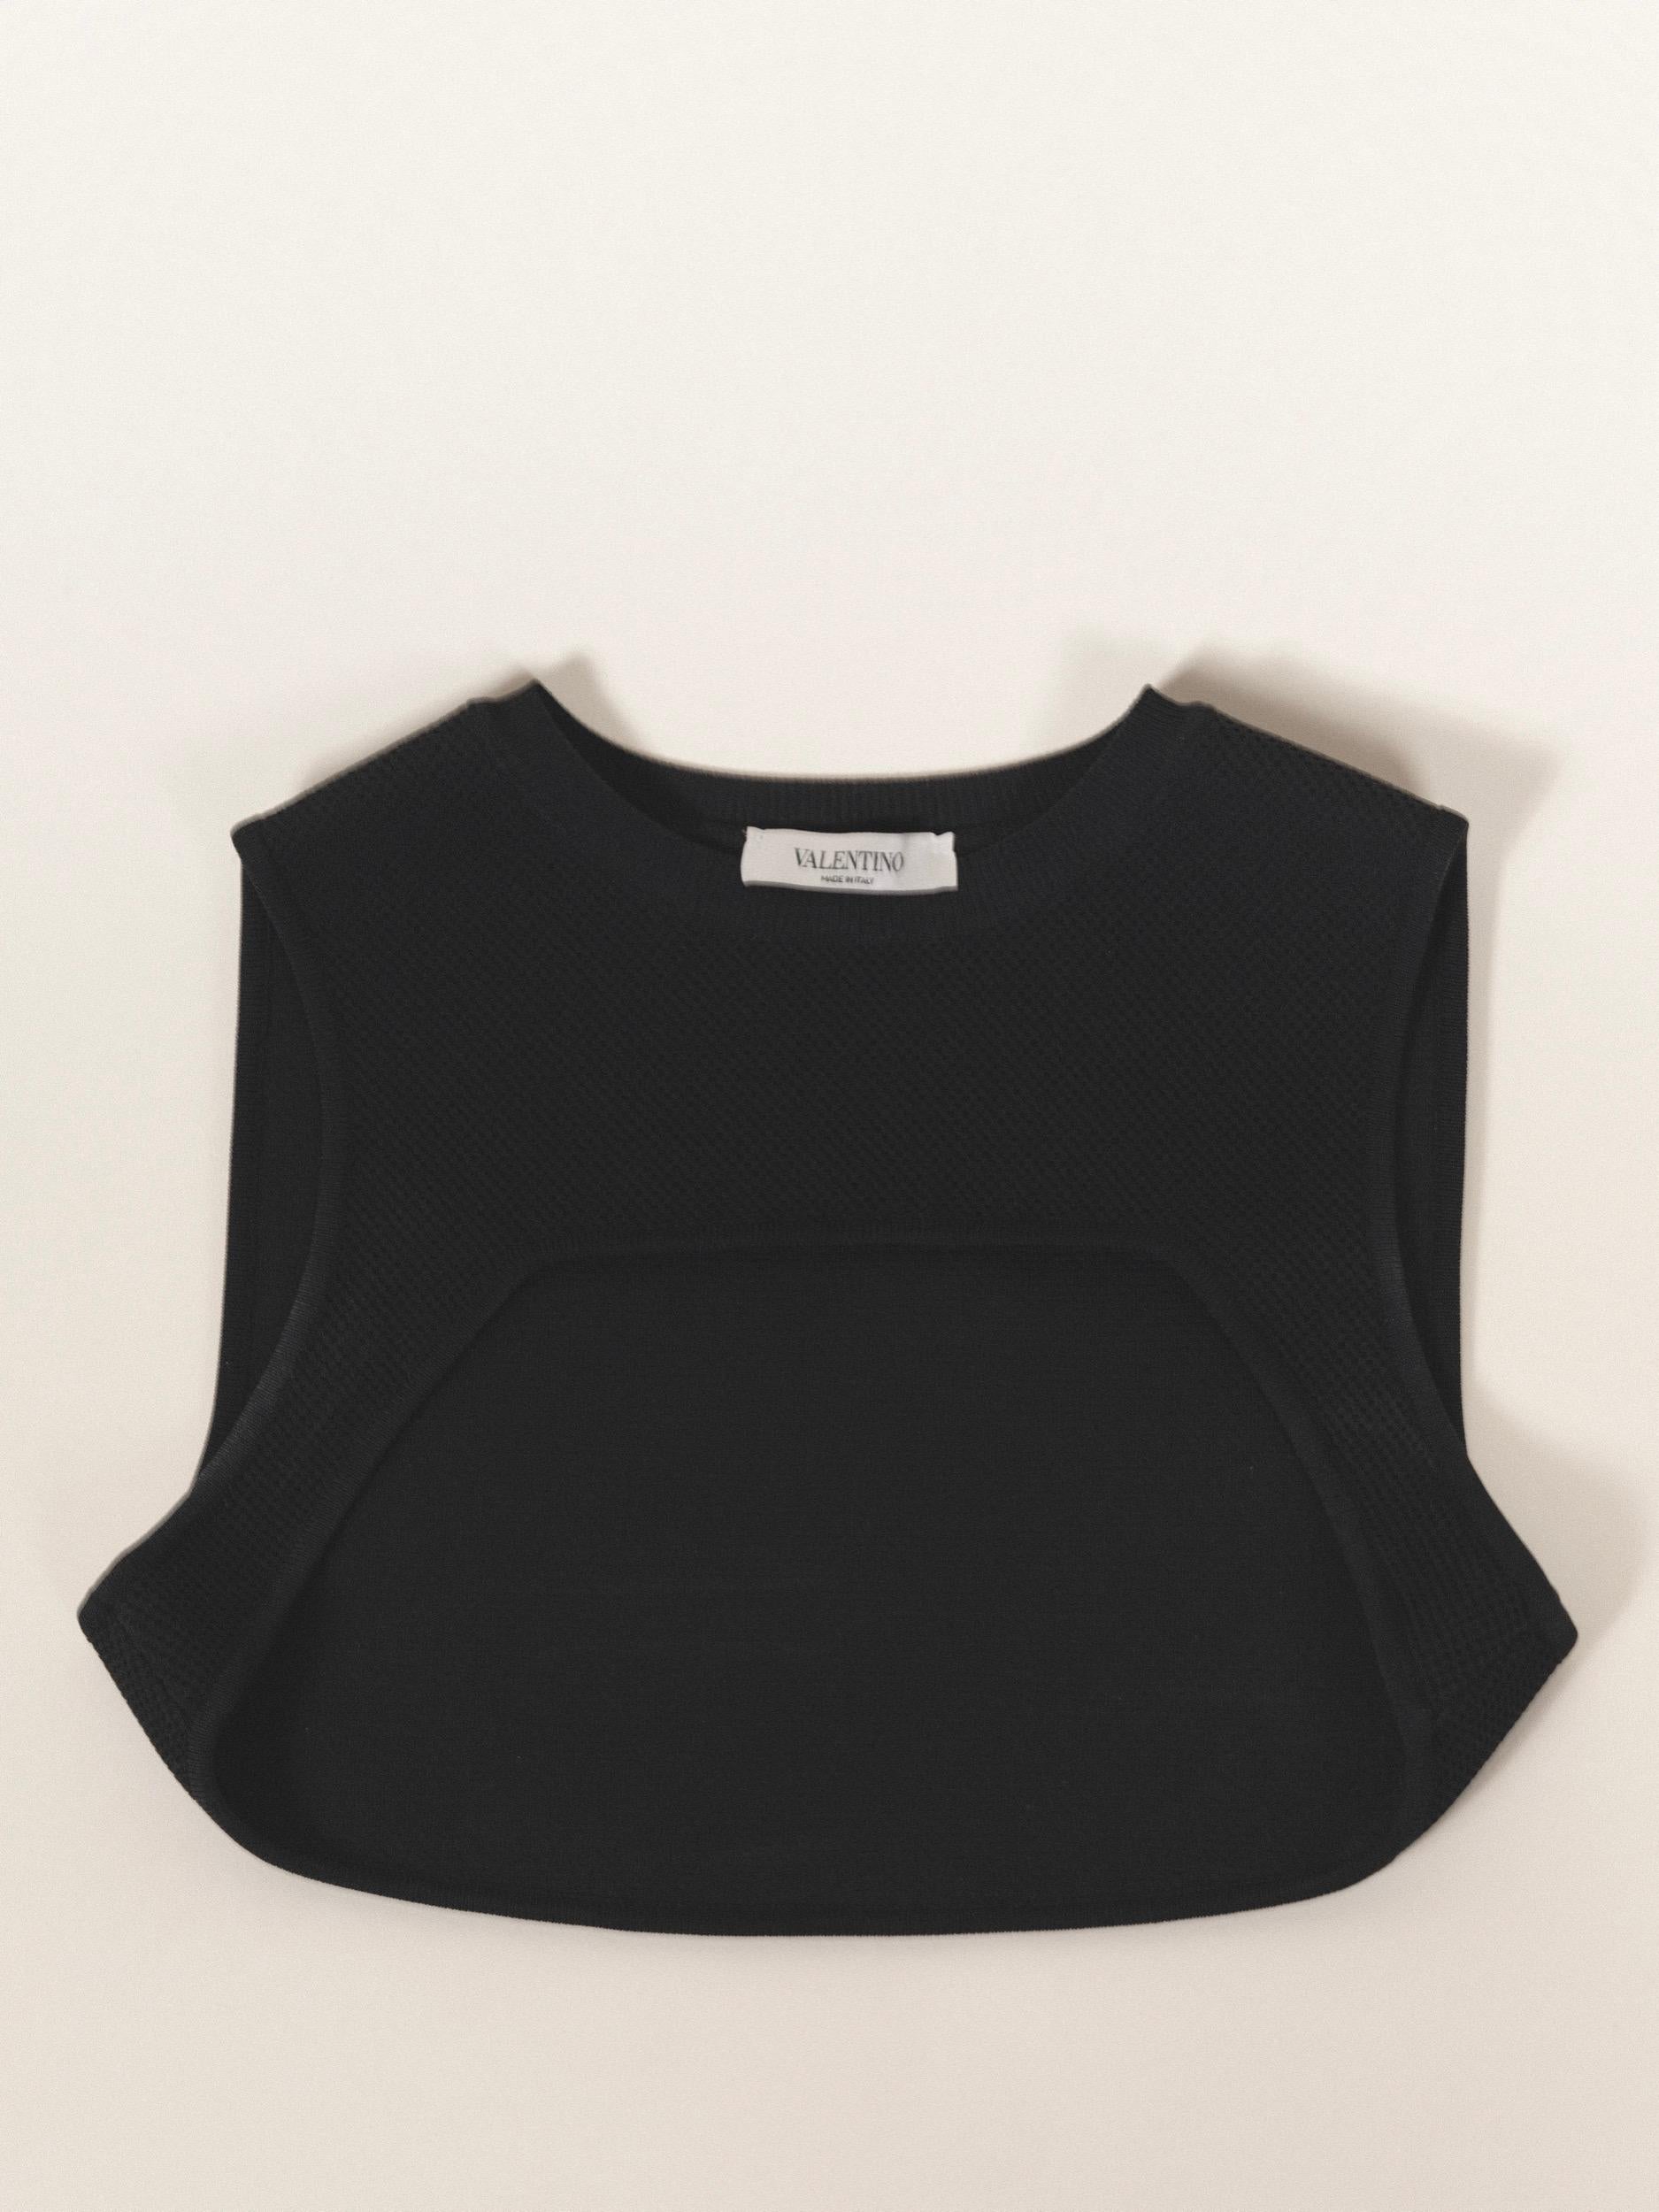 Valentino Crop Top Collar Harness Layering Piece Size Small 2000's  10